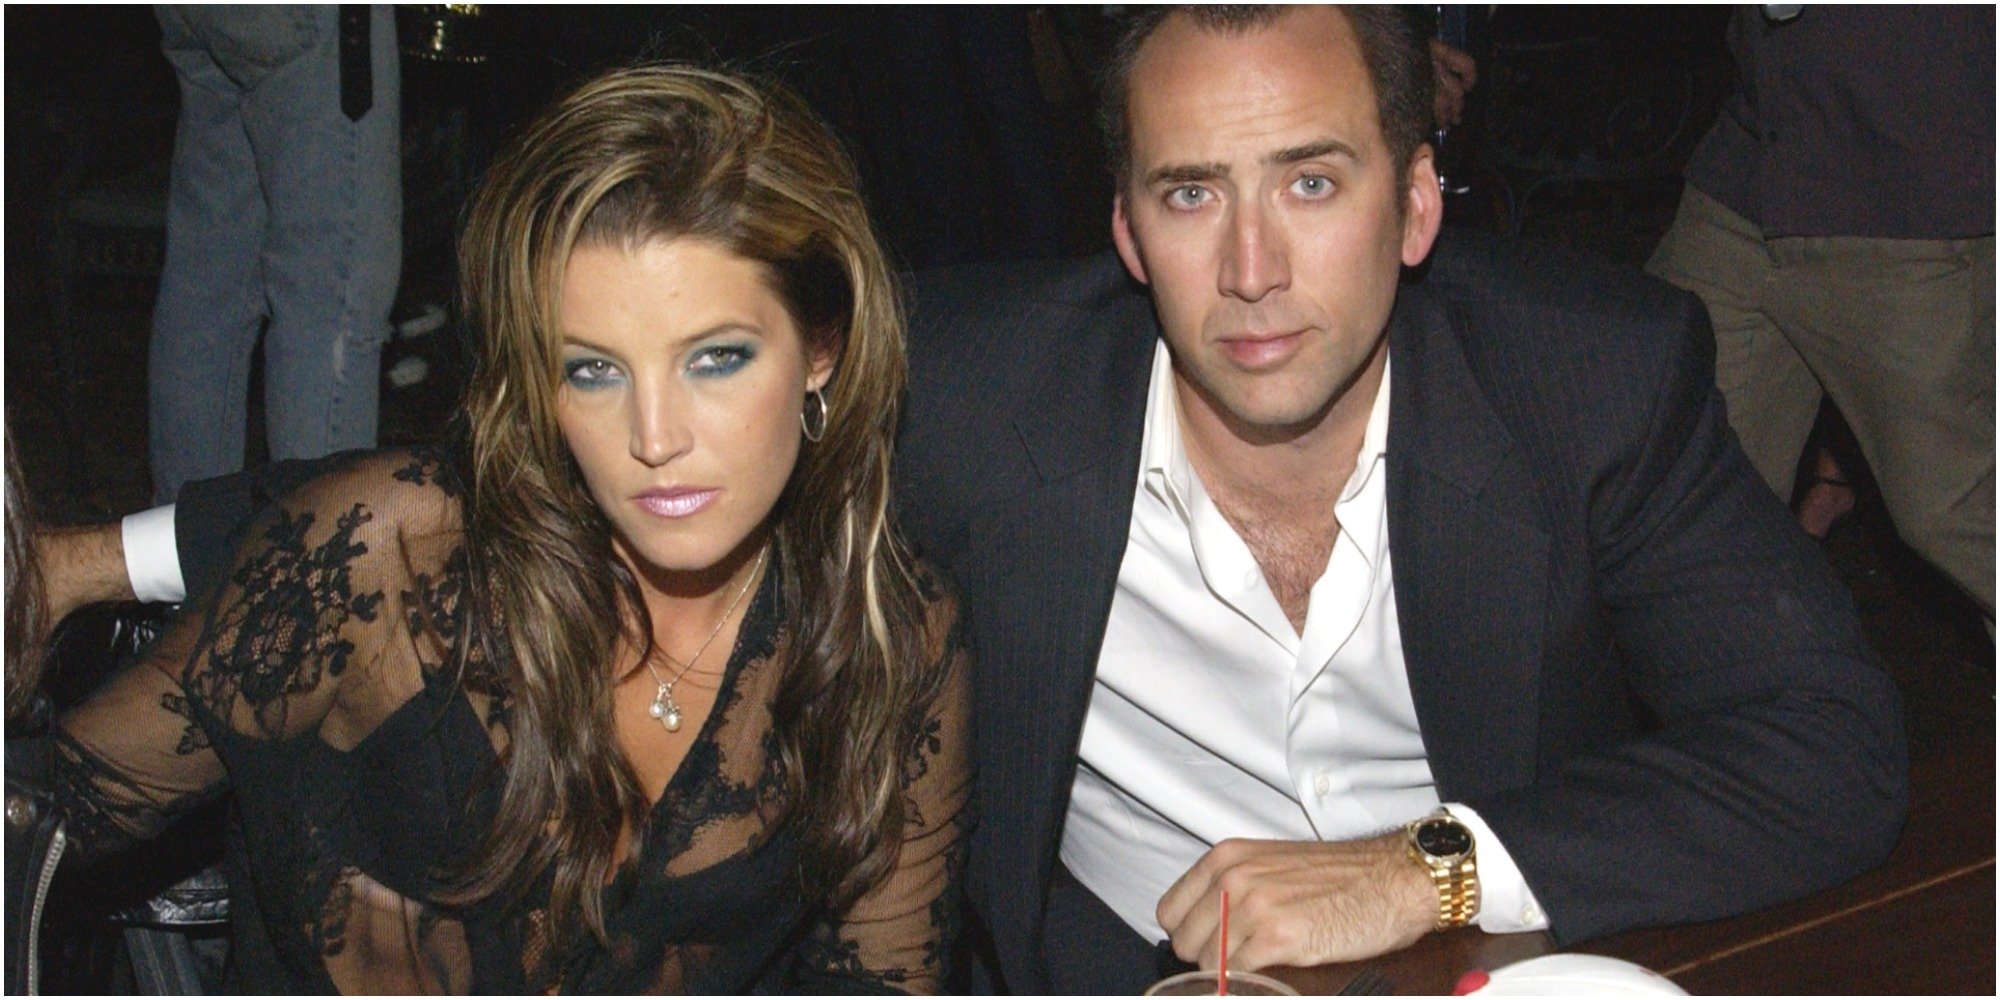 Lisa Marie Presley and Nicolas Cage were married from 2002-2004.